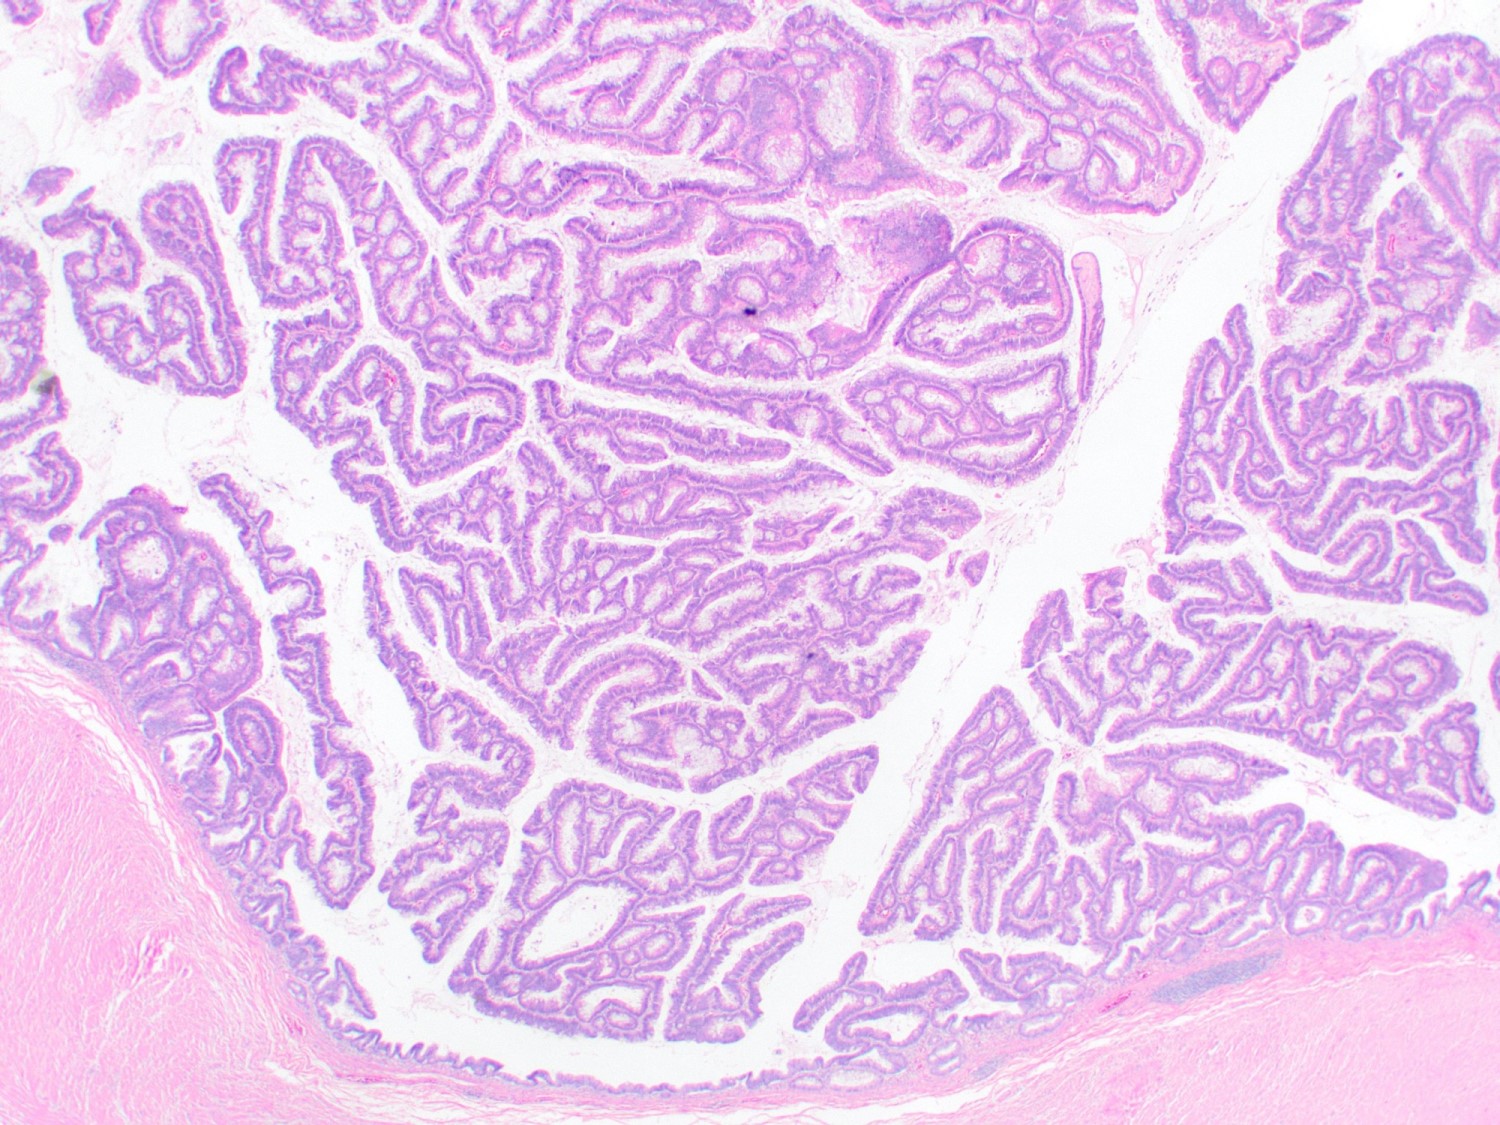 Crowded tubular and villous glands with elongated hyperchromatic nuclei